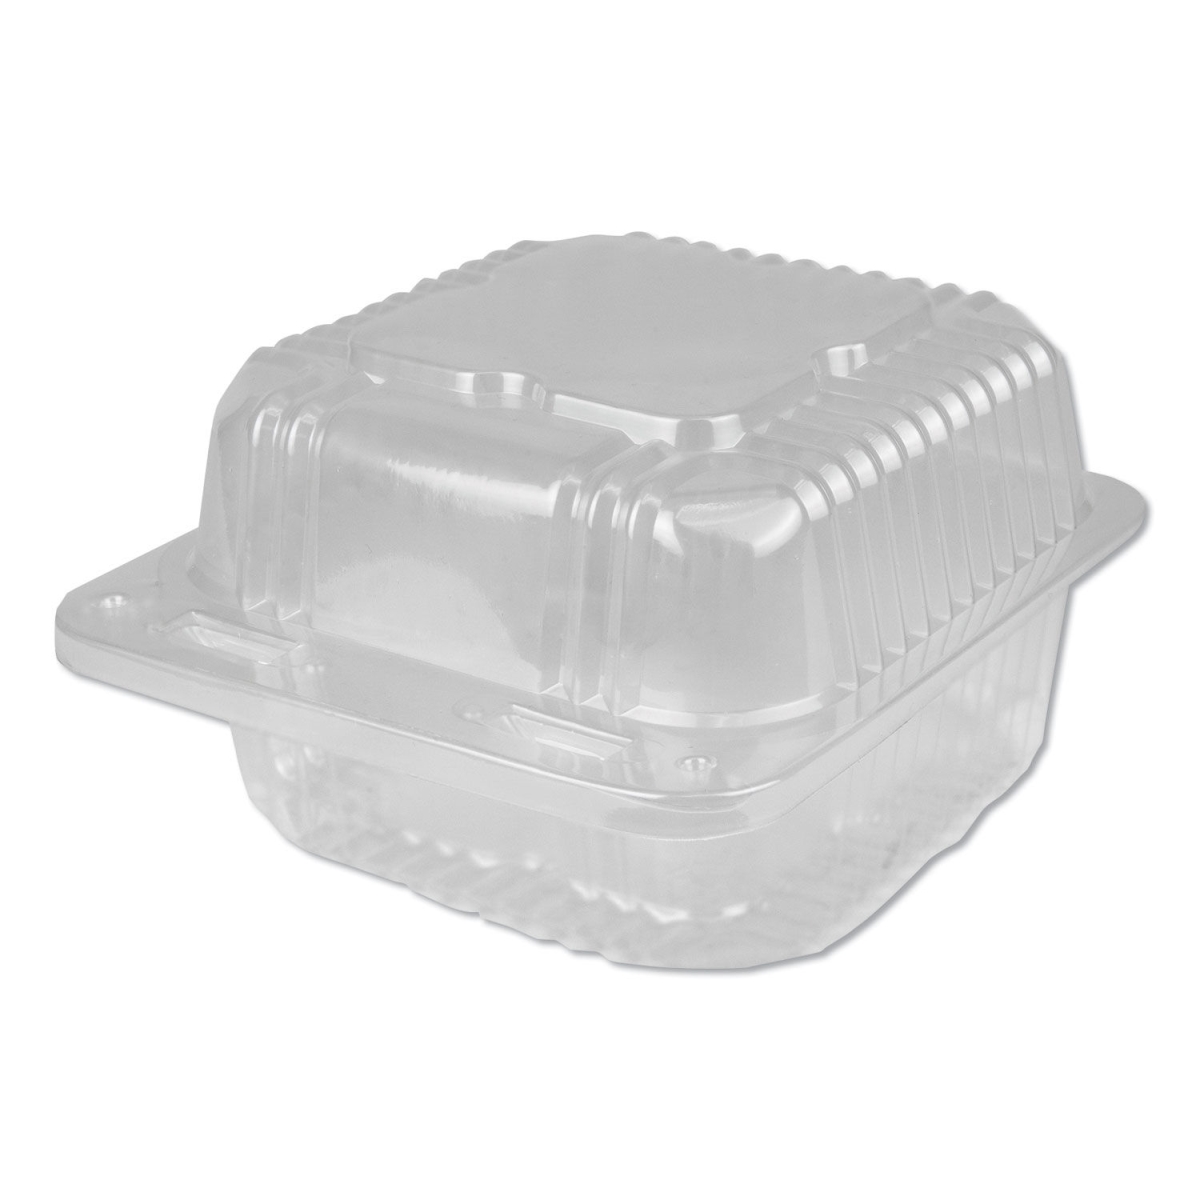 Dpkpxt600 28 Oz 6 In. Container Plastic Square Hinged, Clear